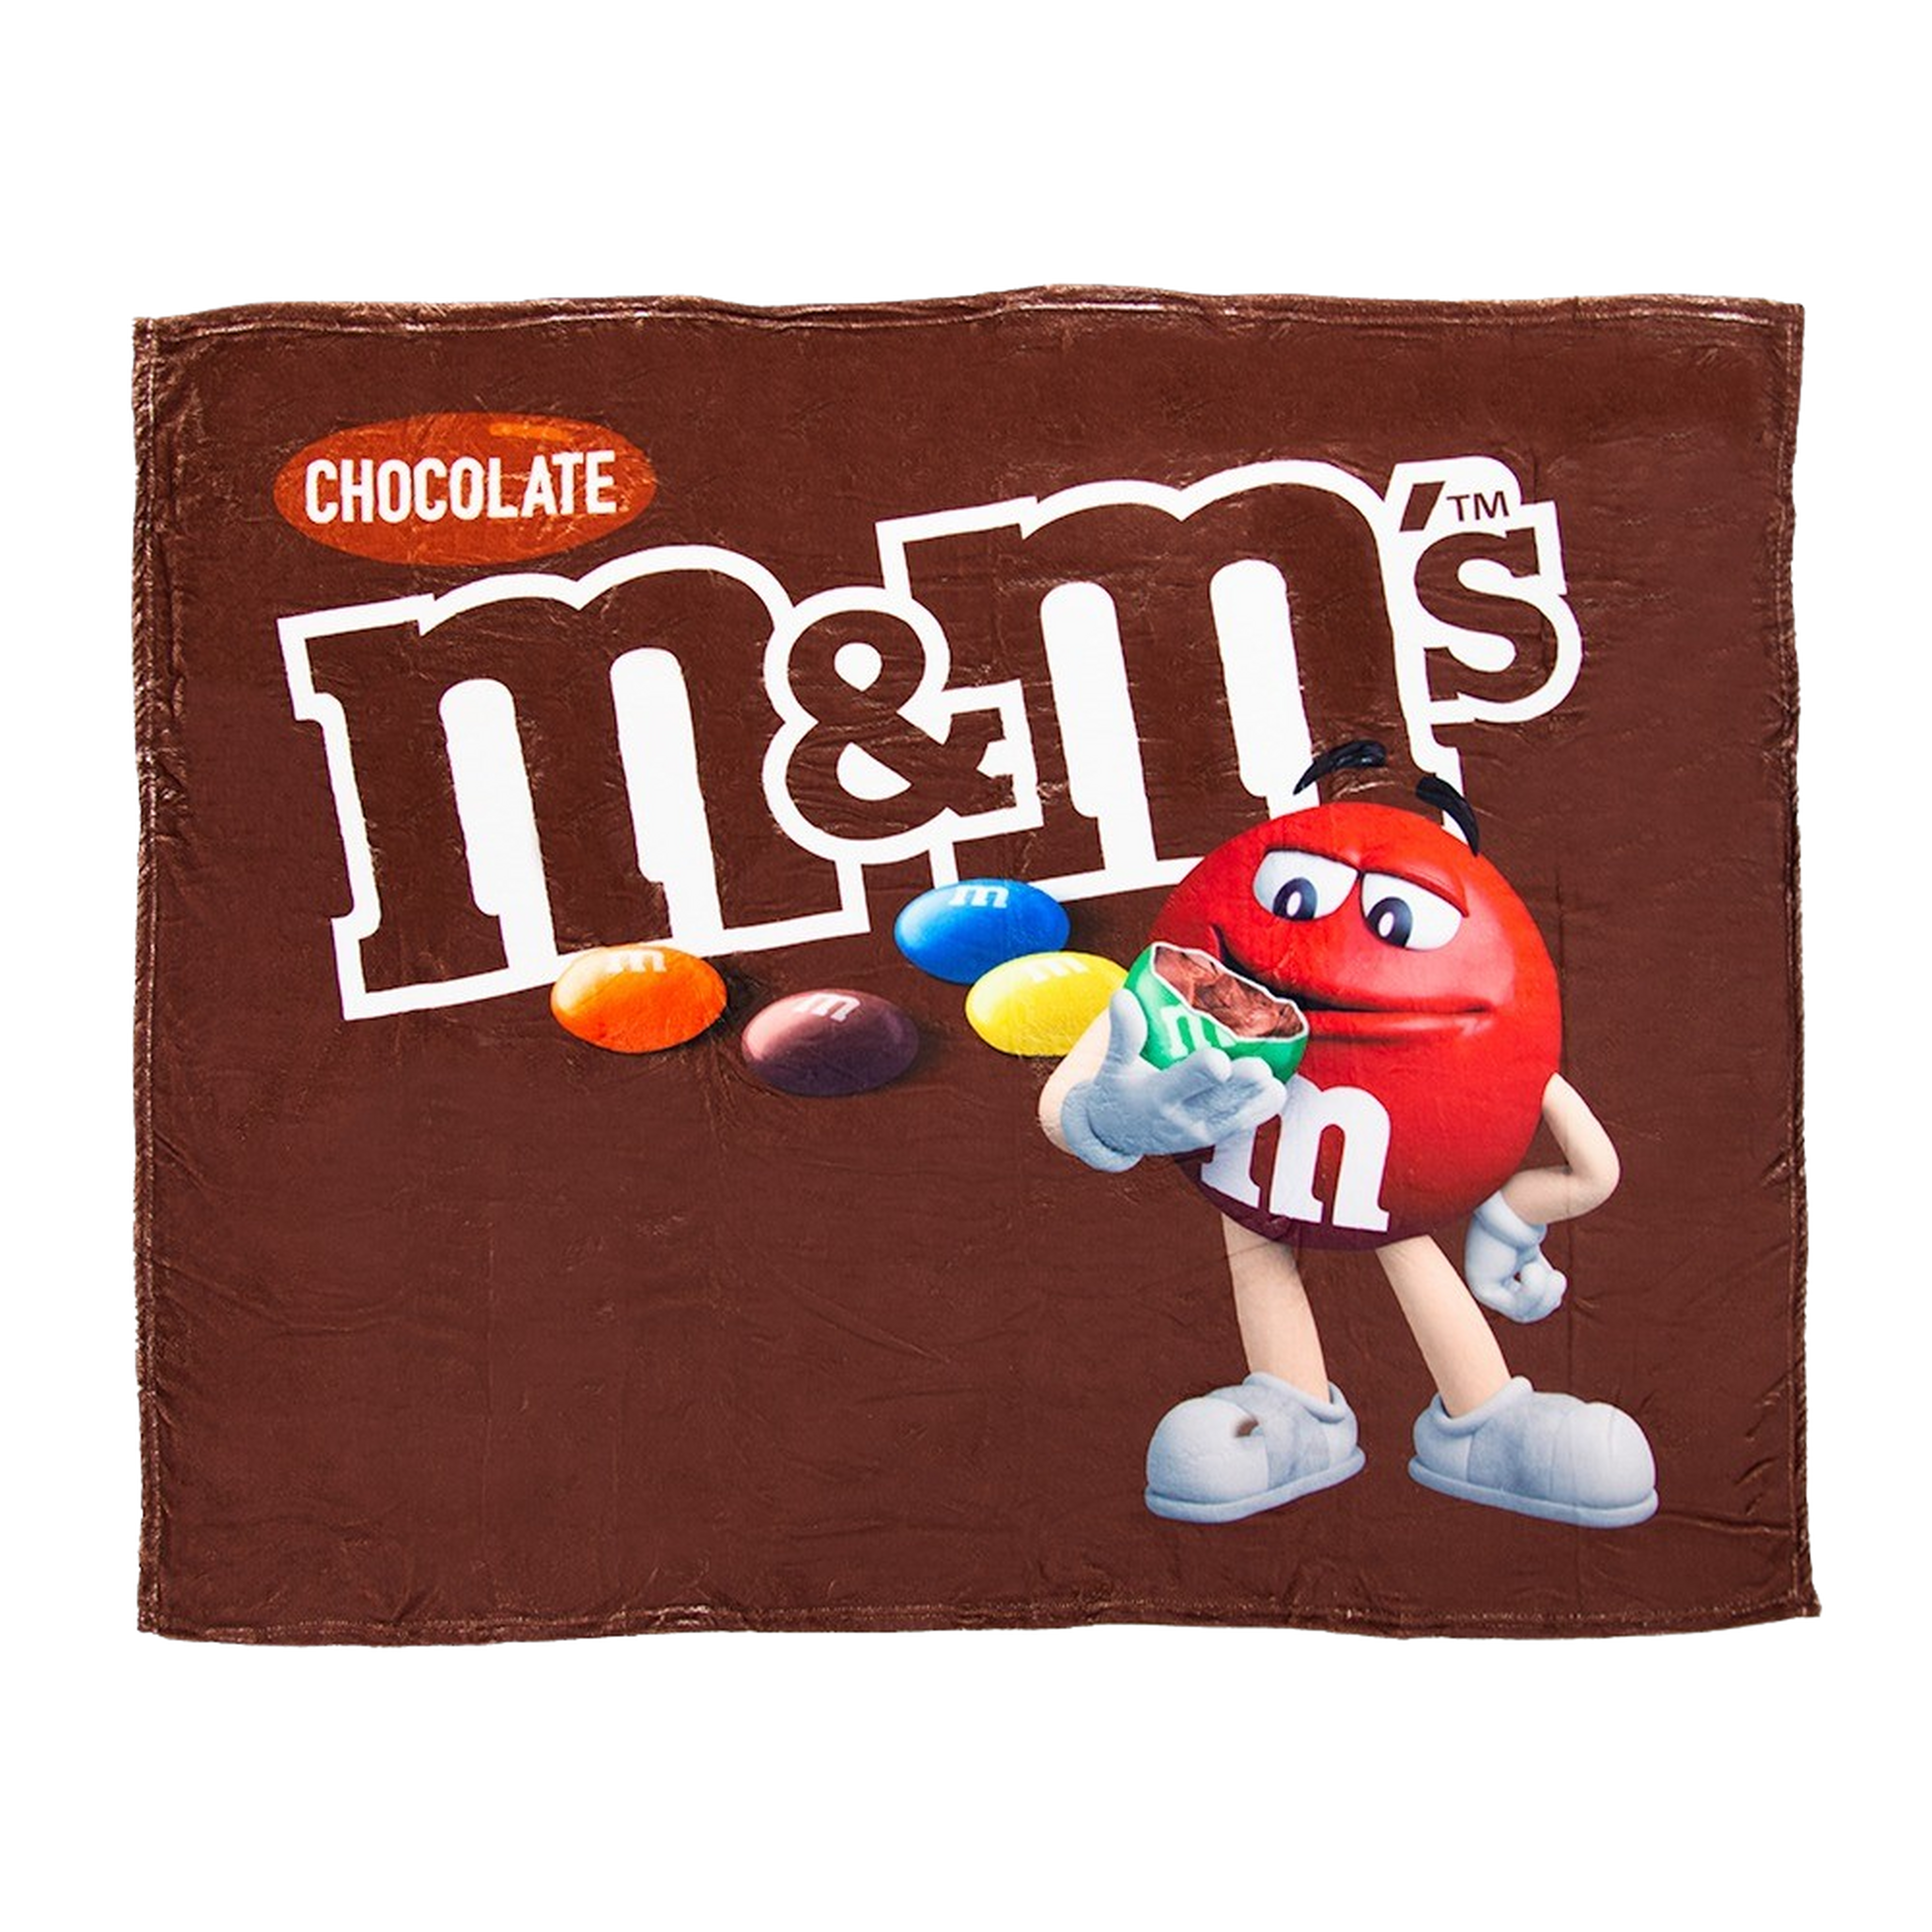  M&Ms Caramel Cold Brew Coffee Candy, Pack of 3 (1.41